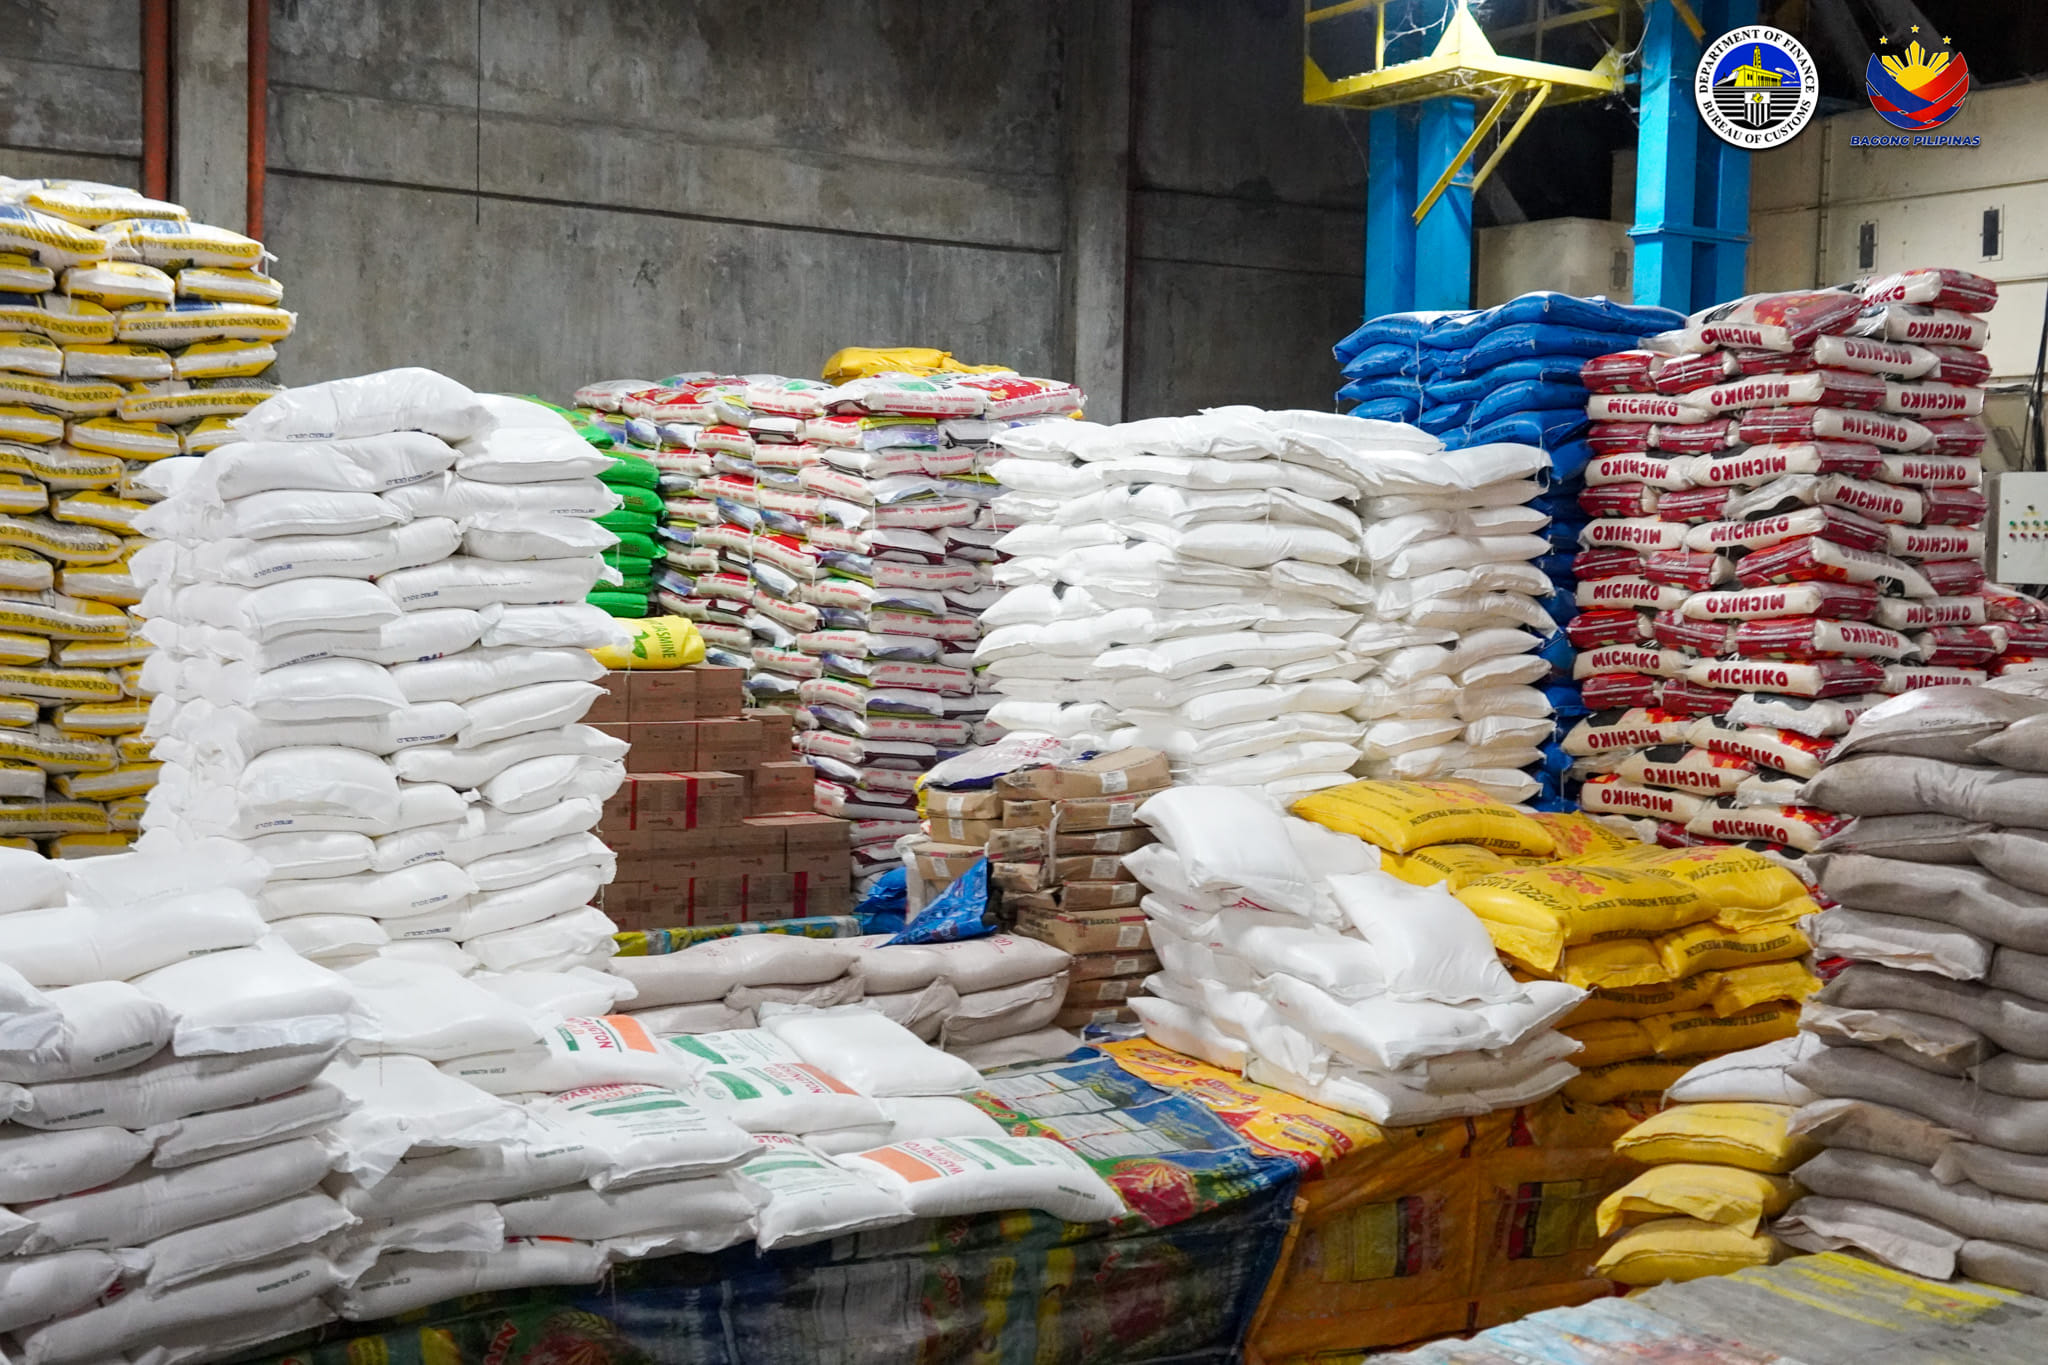 BOC finds overpriced, imported rice in 2 warehouses